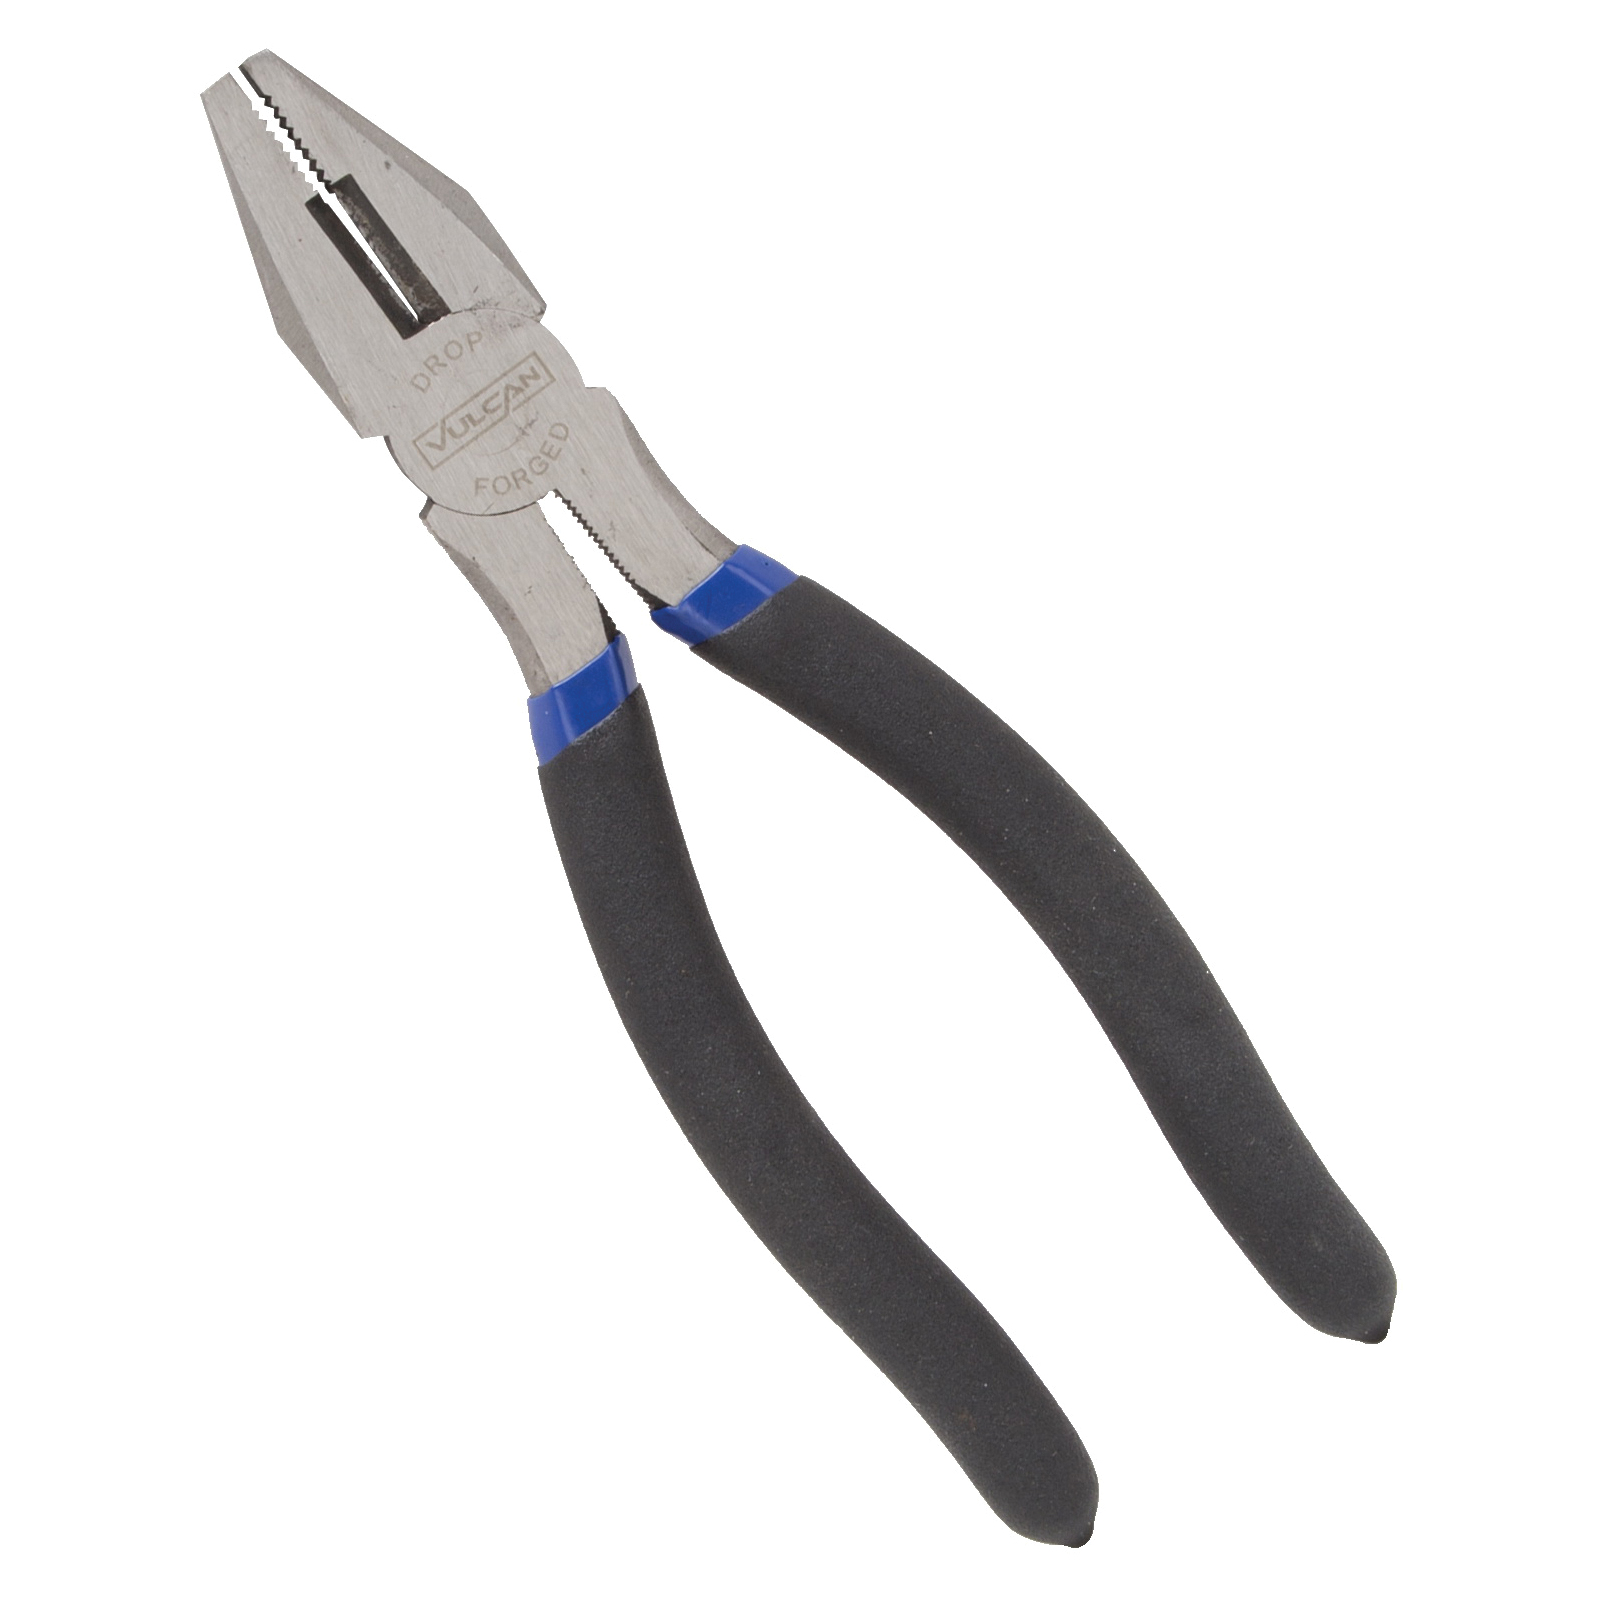 PC918-21 Linesman Plier, 8 in OAL, 1.2 mm Cutting Capacity, 1-1/2 in Jaw Opening, Black/Blue Handle